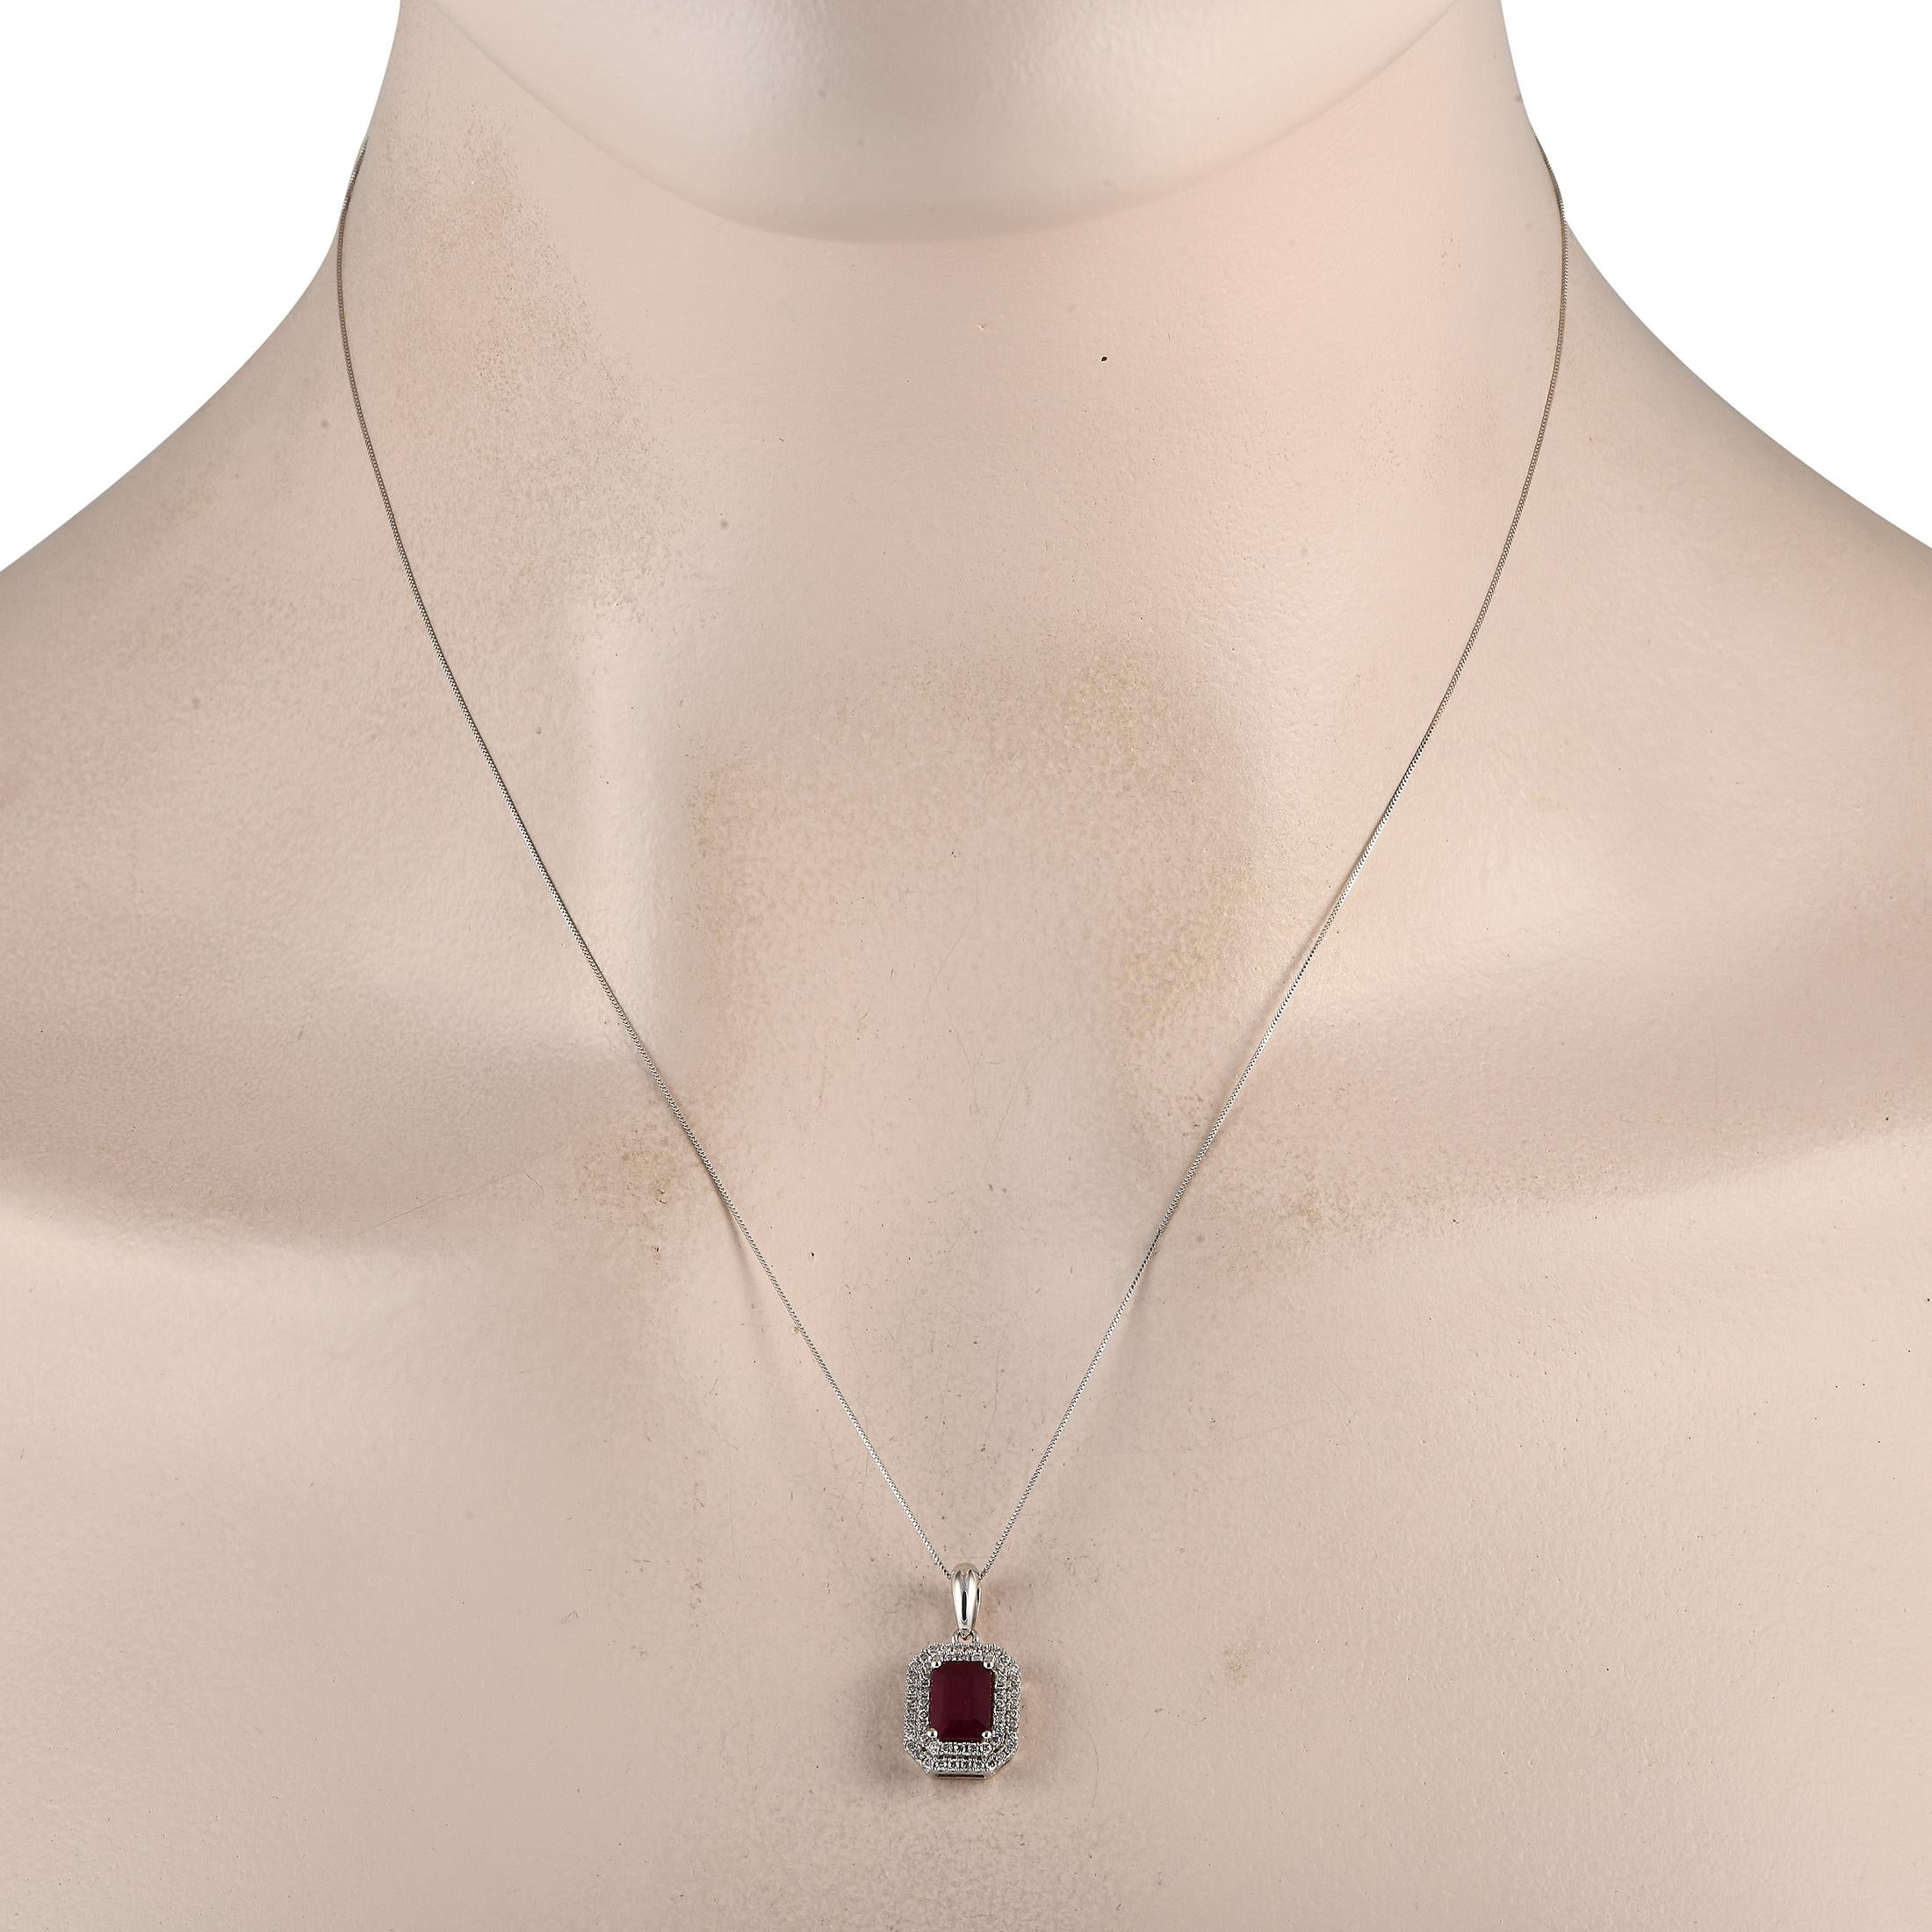 Here is a necklace that will update your outfit with luxurious detail. This LB Exclusive piece comes with a delicate 16-long box chain and a smooth and polished bail. The pendant has an octagonal silhouette with a gorgeous emerald-cut ruby at the